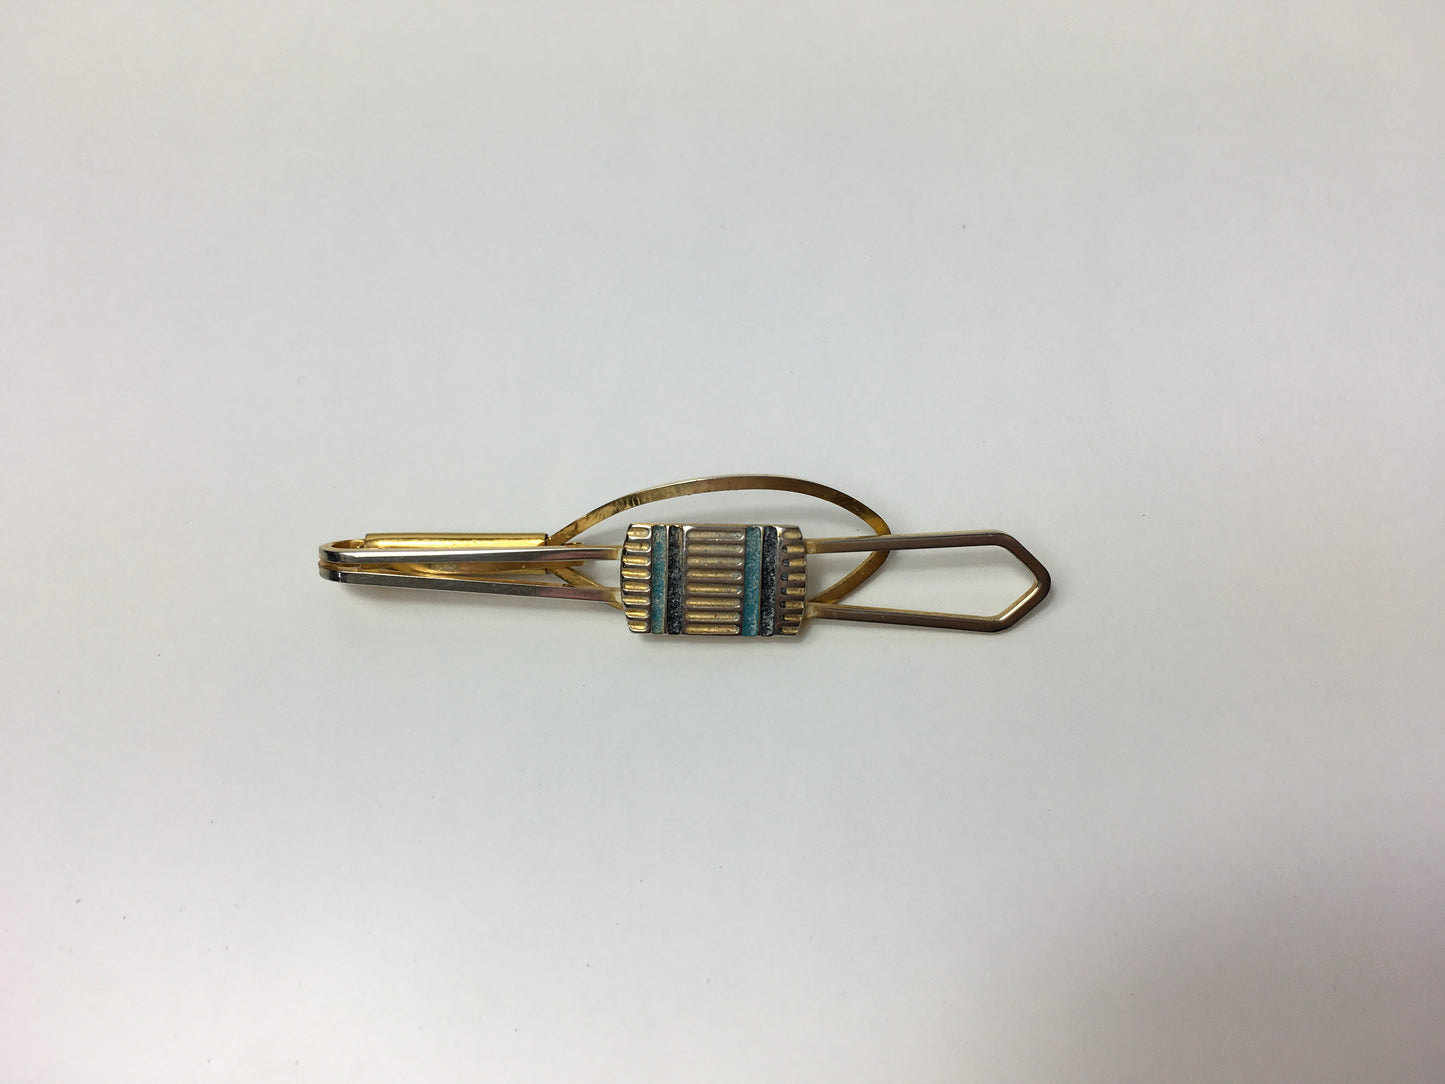 Original Gents Tie Pin - In a Gold Colour with Contrast Stripes in Light and Dark Blue